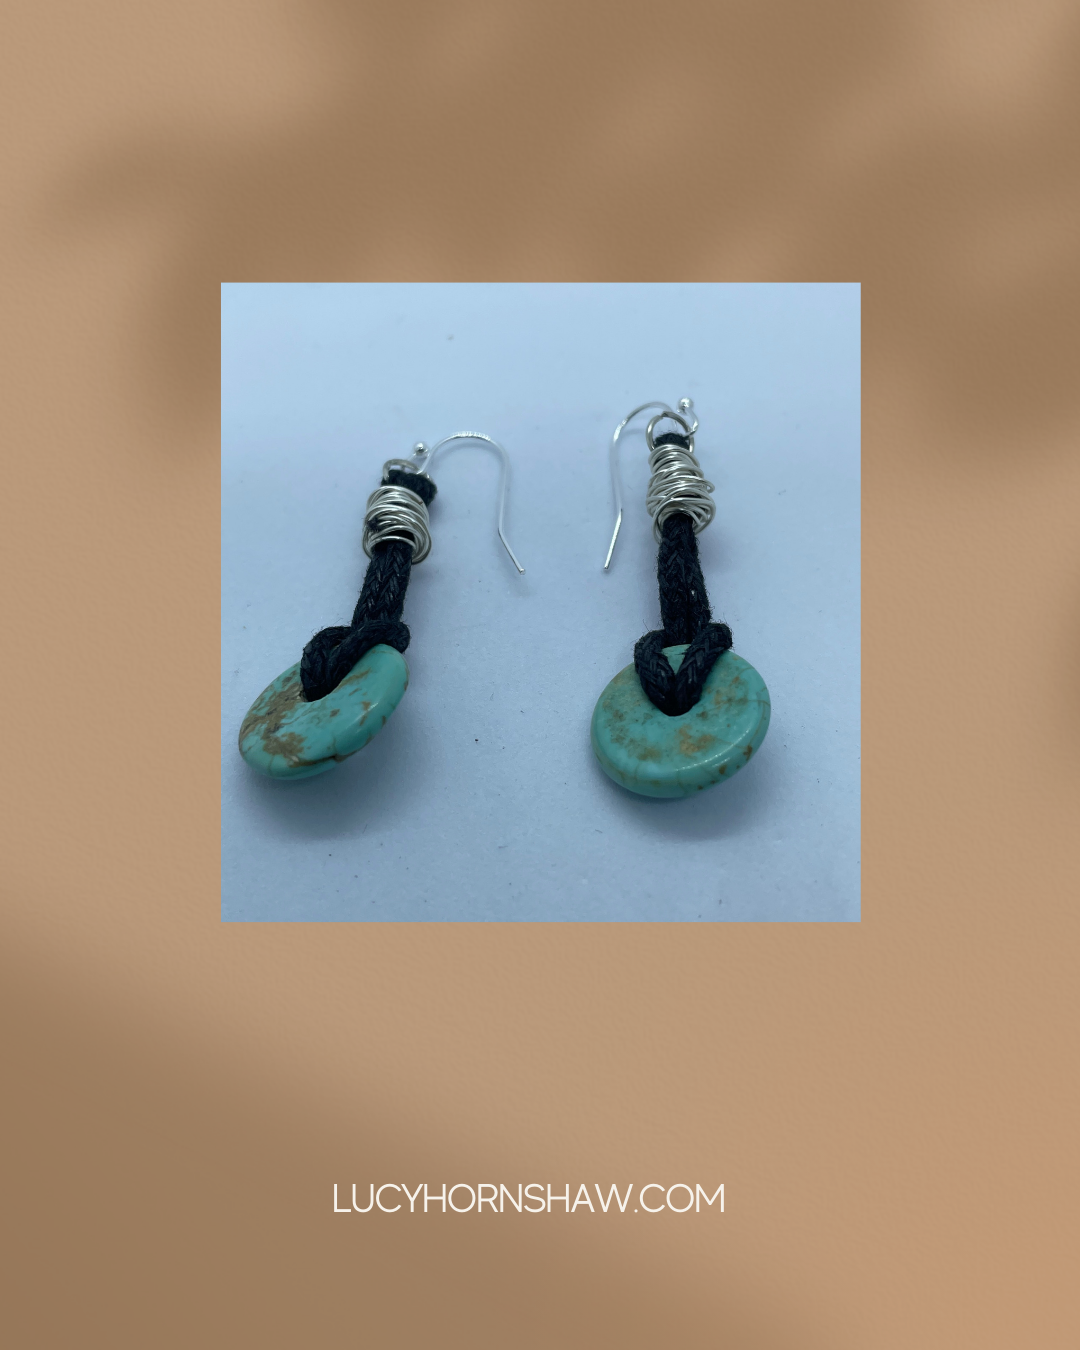 Black leather thong earrings with turquoise bead